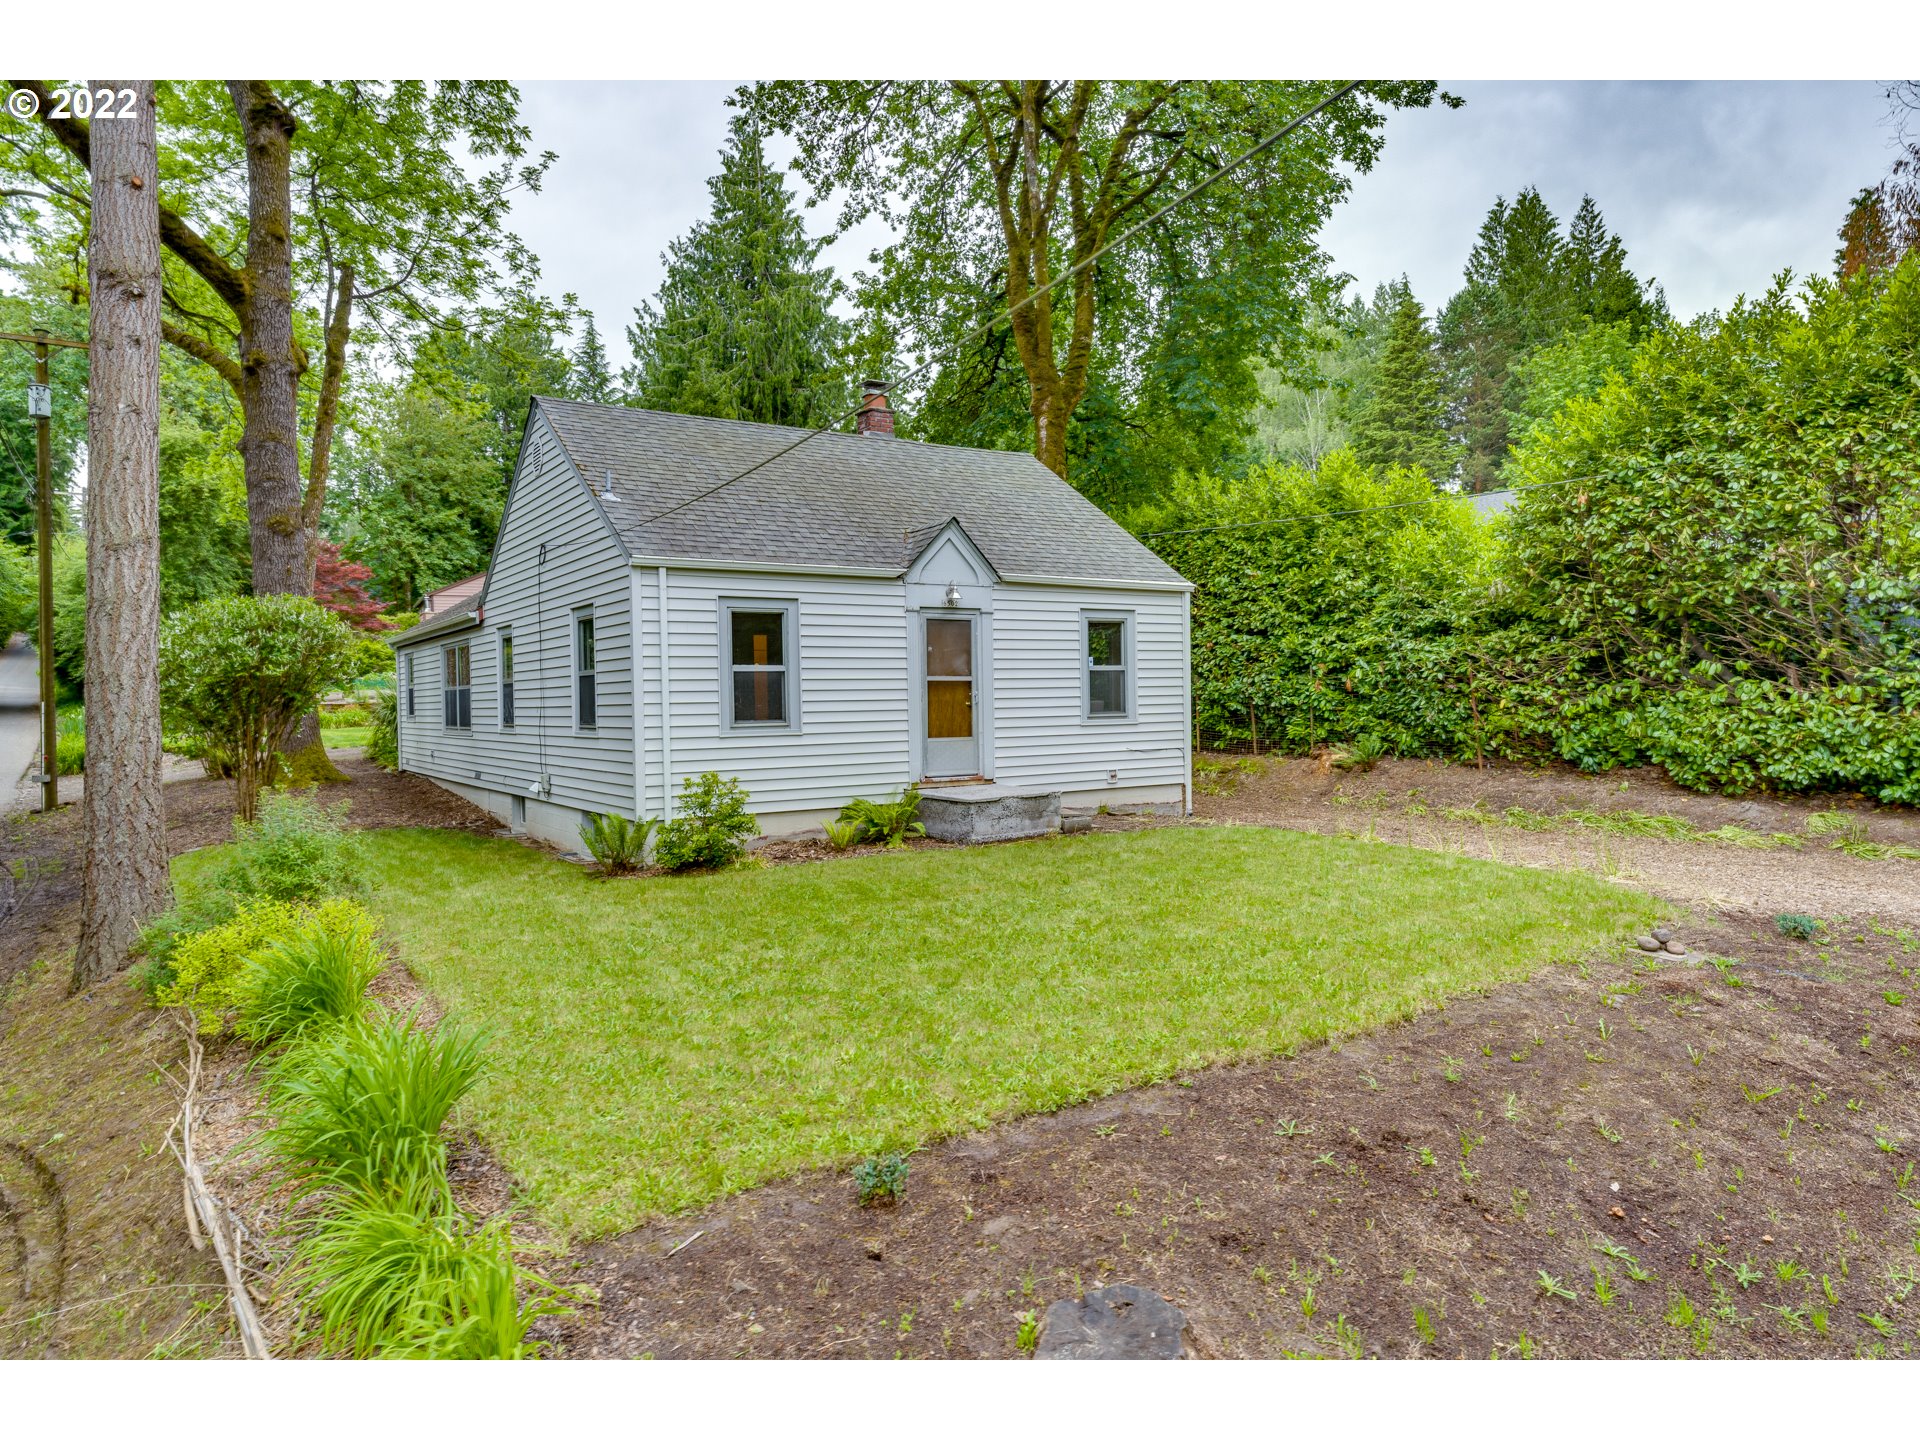 6502 SW VERMONT ST, Portland, OR 97223